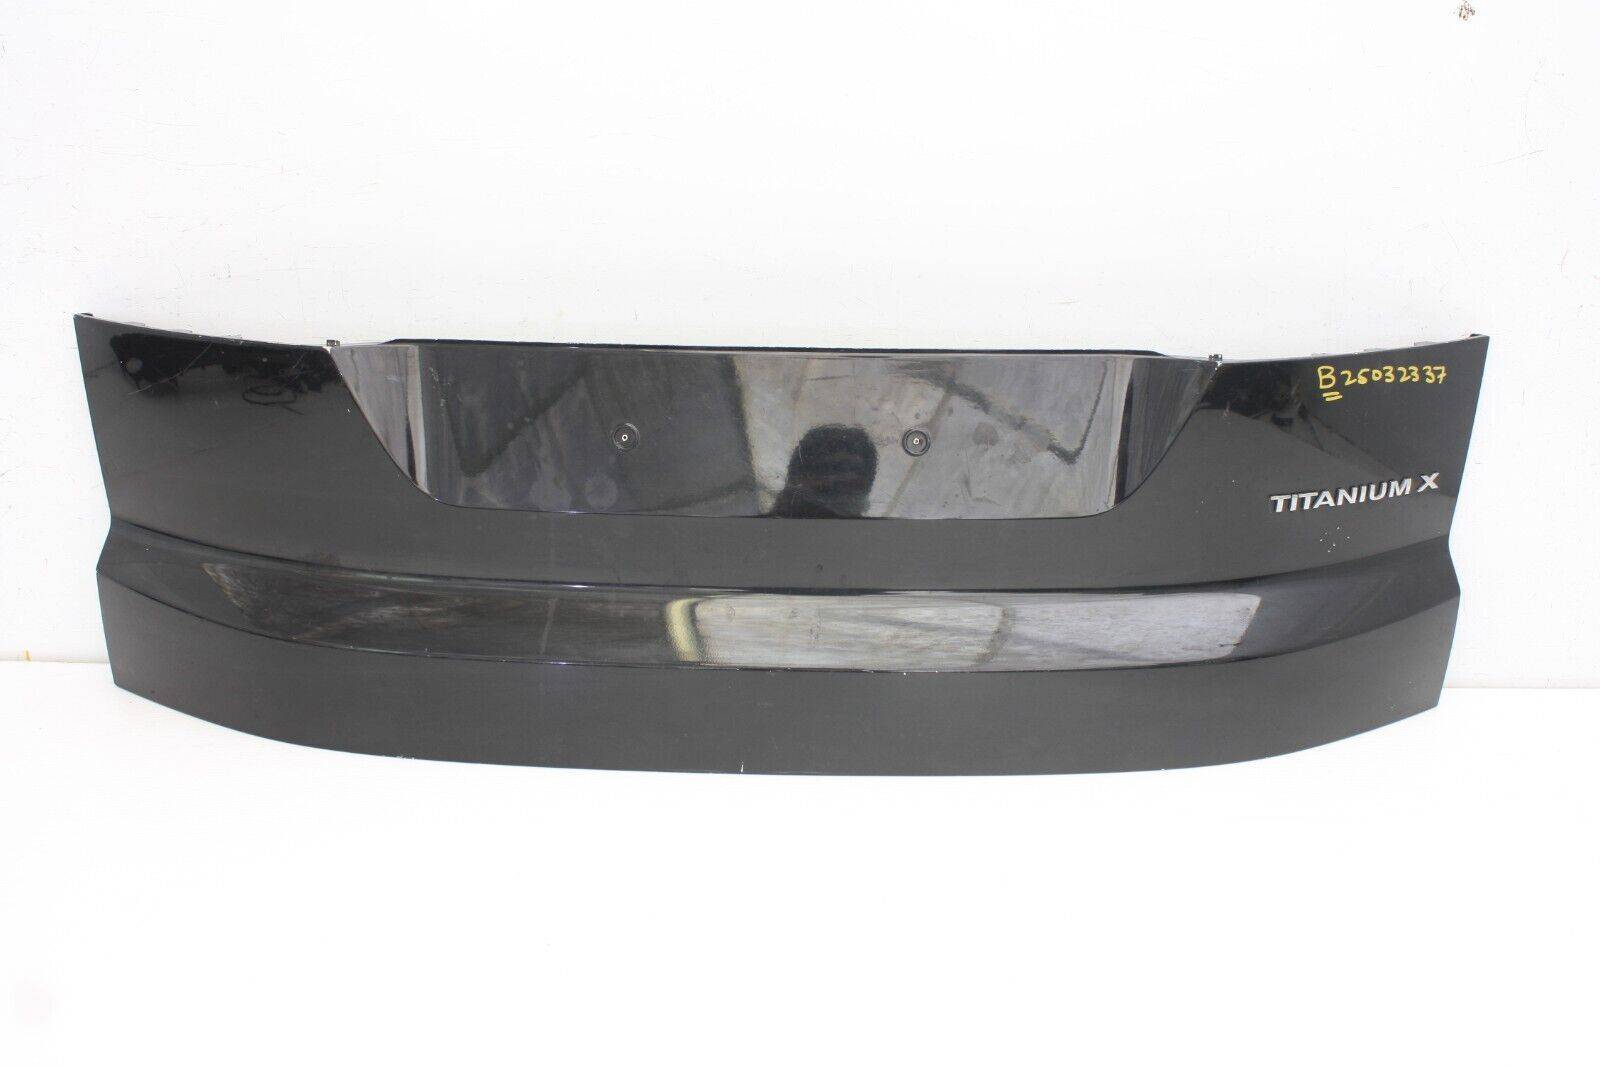 Ford-S-Max-Tailgate-Boot-Lid-Lower-Section-2010-TO-2015-AM21-423A40-AH-Genuine-175665504613